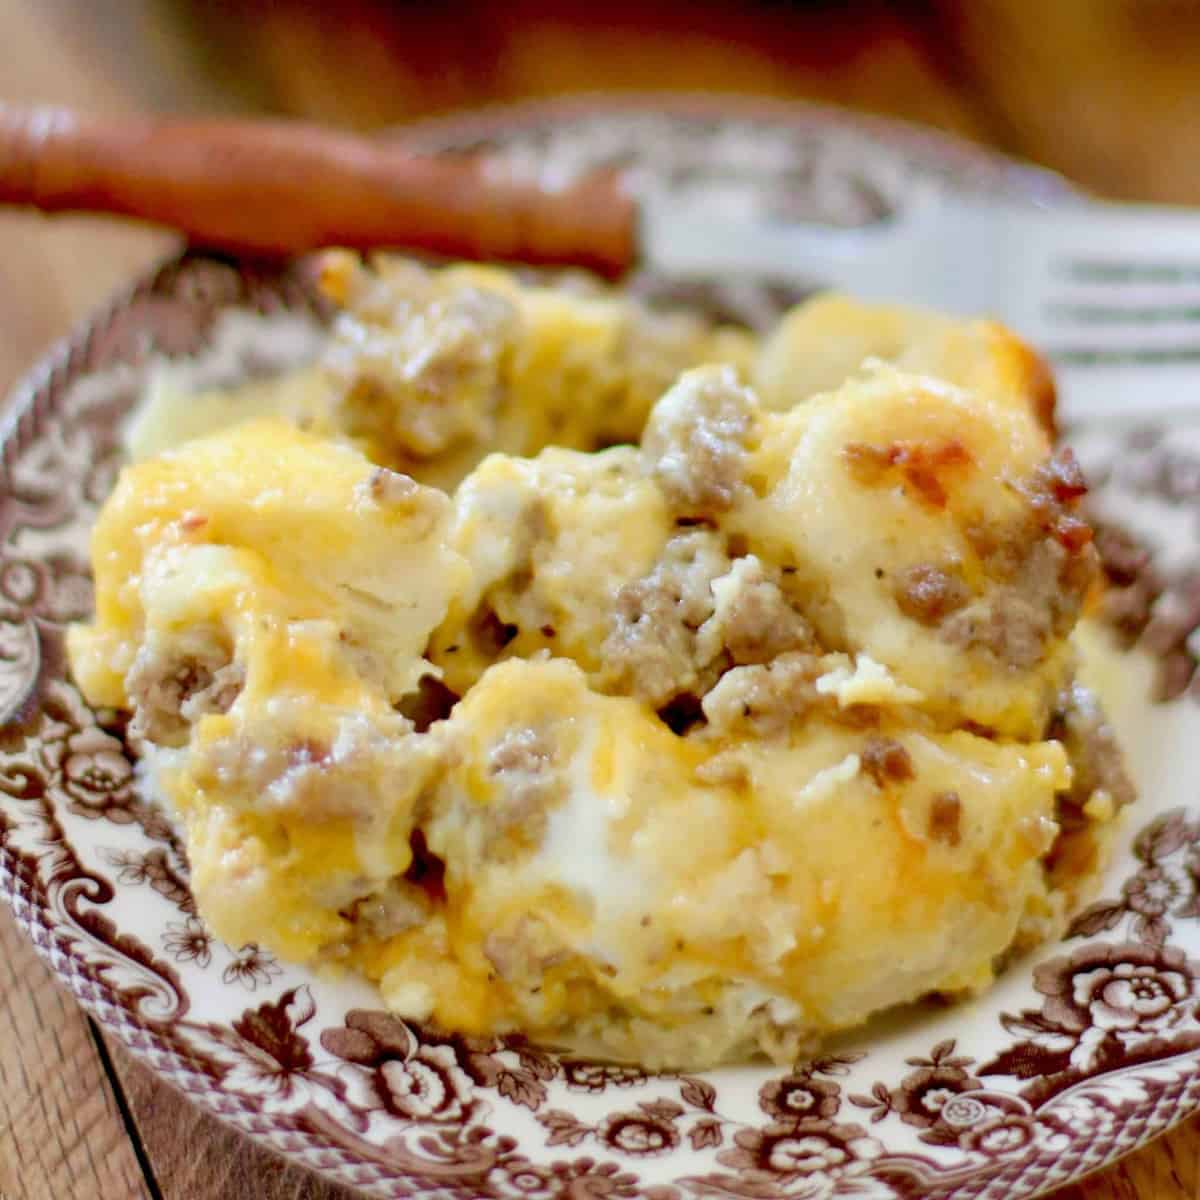 Sausage, Egg and Cheese Biscuit Casserole